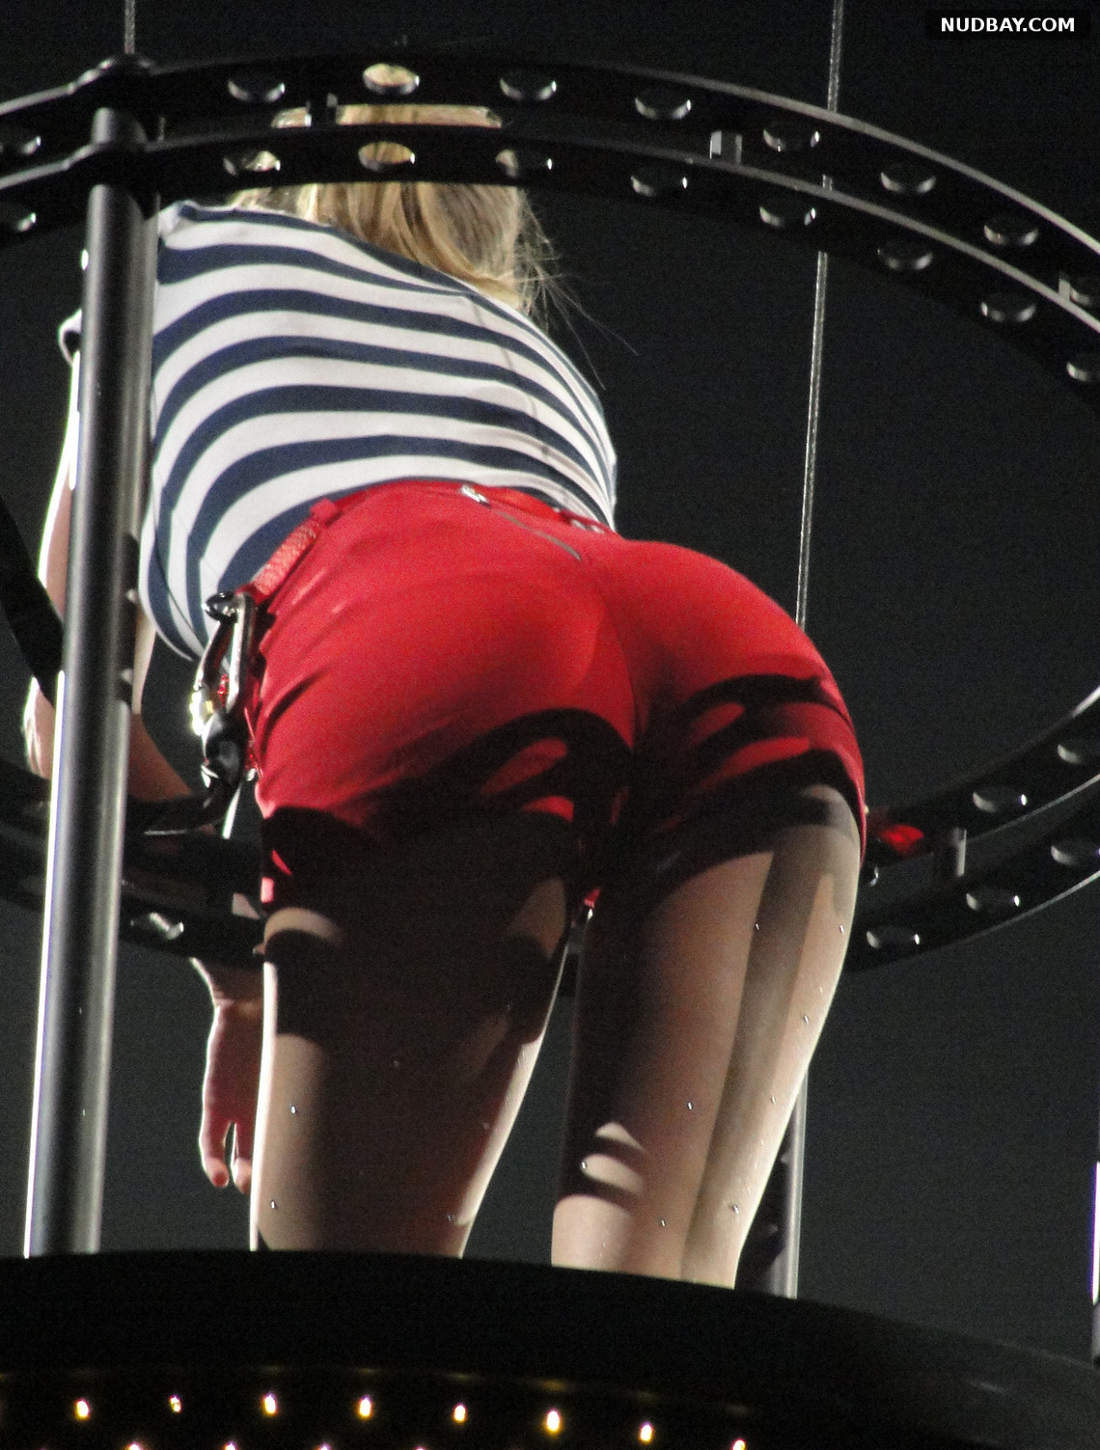 Taylor Swift Ass concert in East Rutherford Jul 13 2013